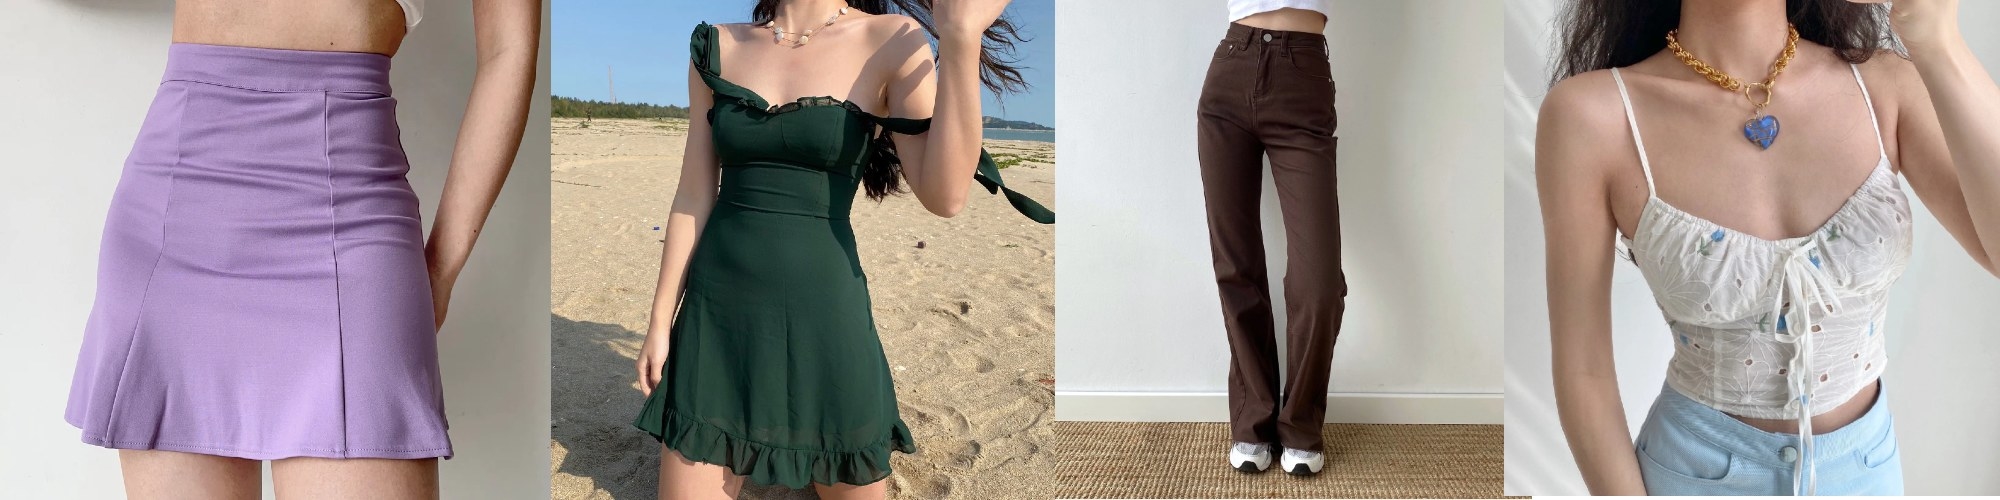 4 images 1. purple highwaisted mini skirt 2. emerald green mini dress 3. brown high waist pants 4. white and blue floral spaghetti strap button up camisole. 